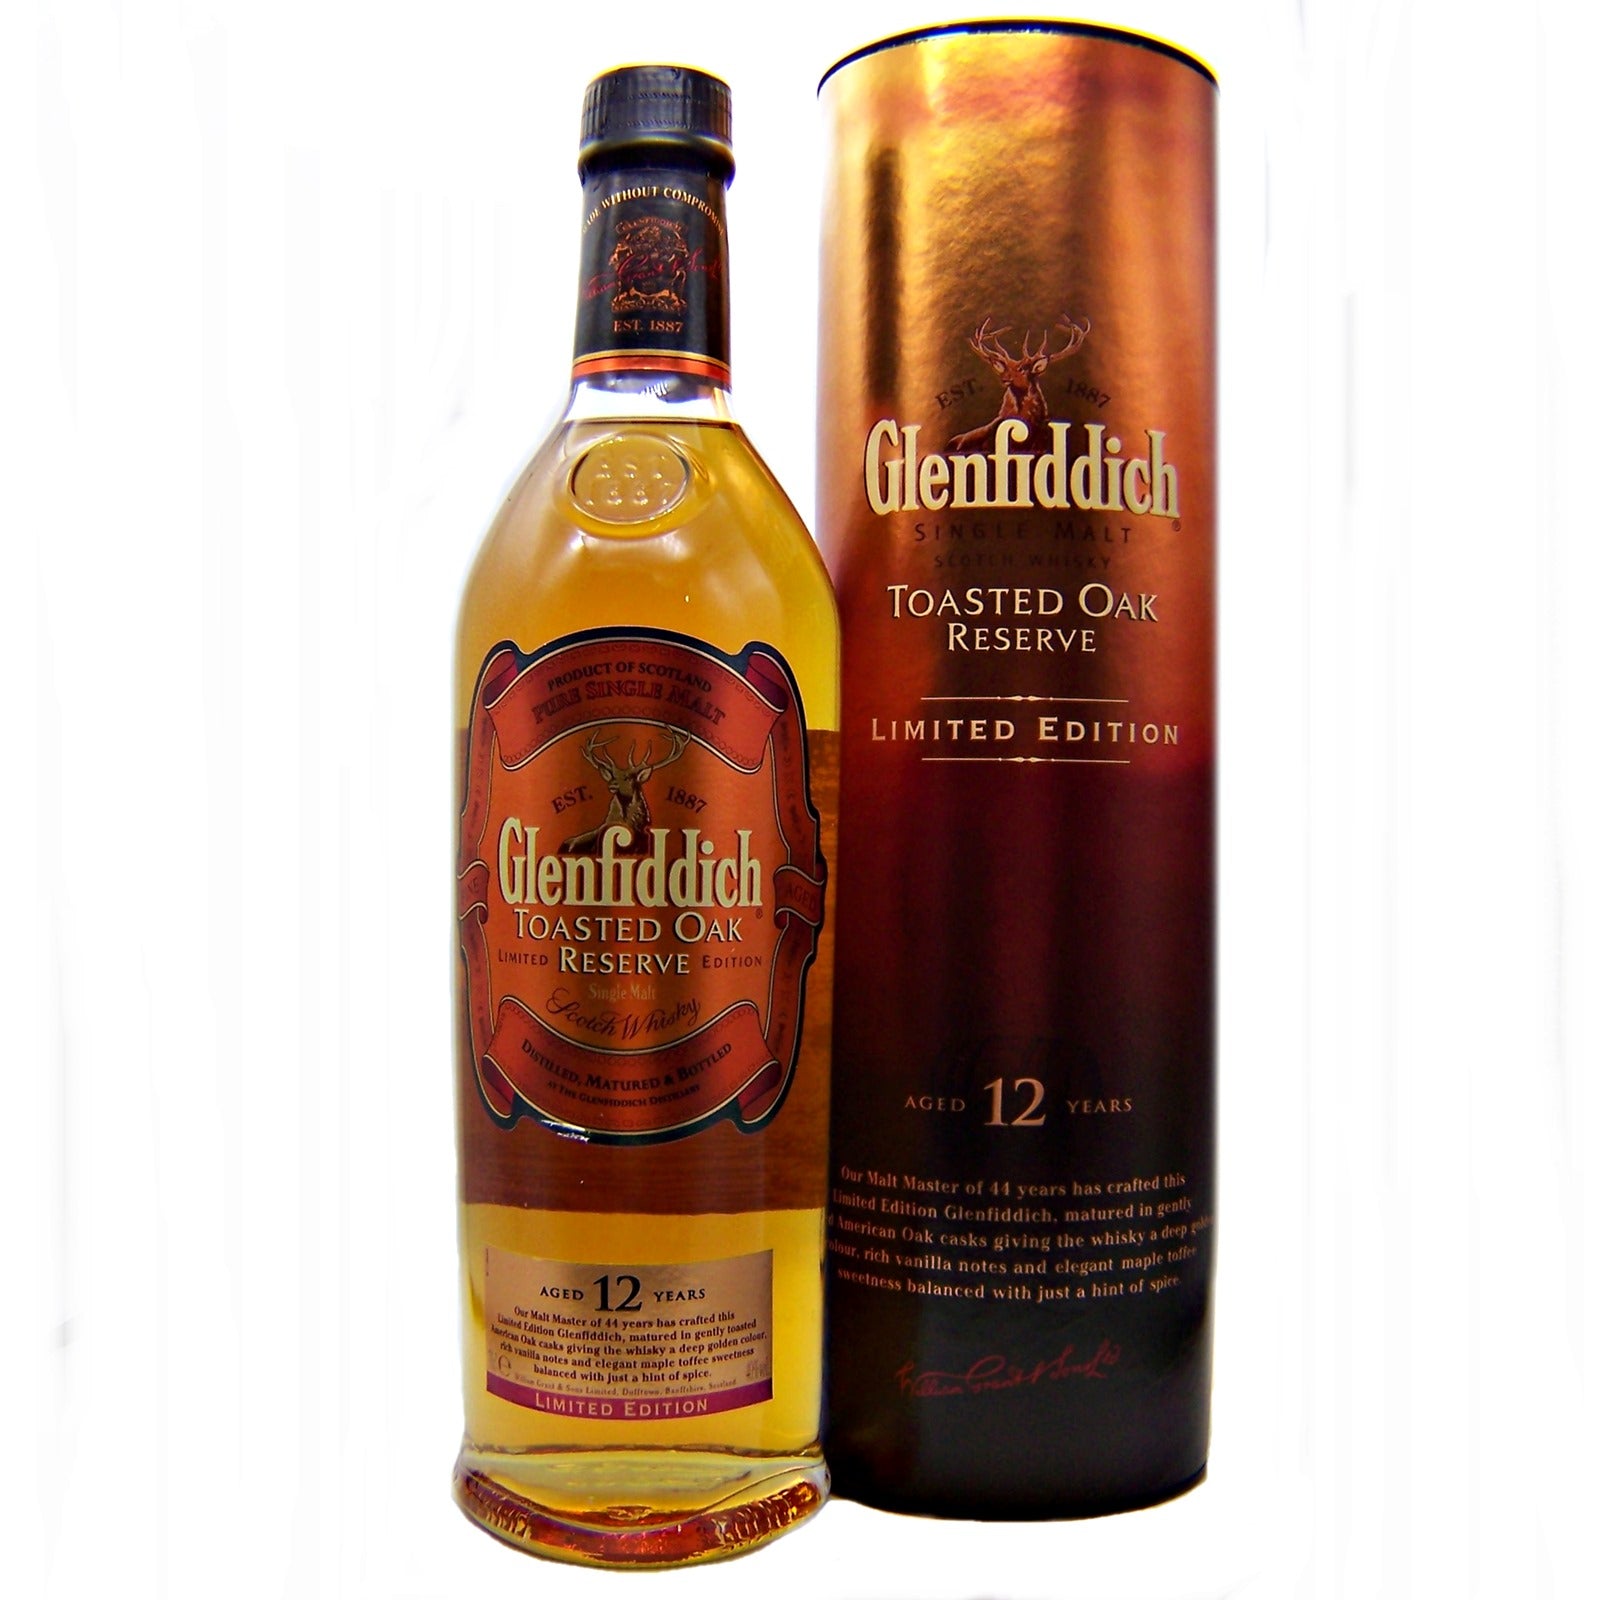 Glenfiddich Toasted Oak 12 Year Old Limited Edition